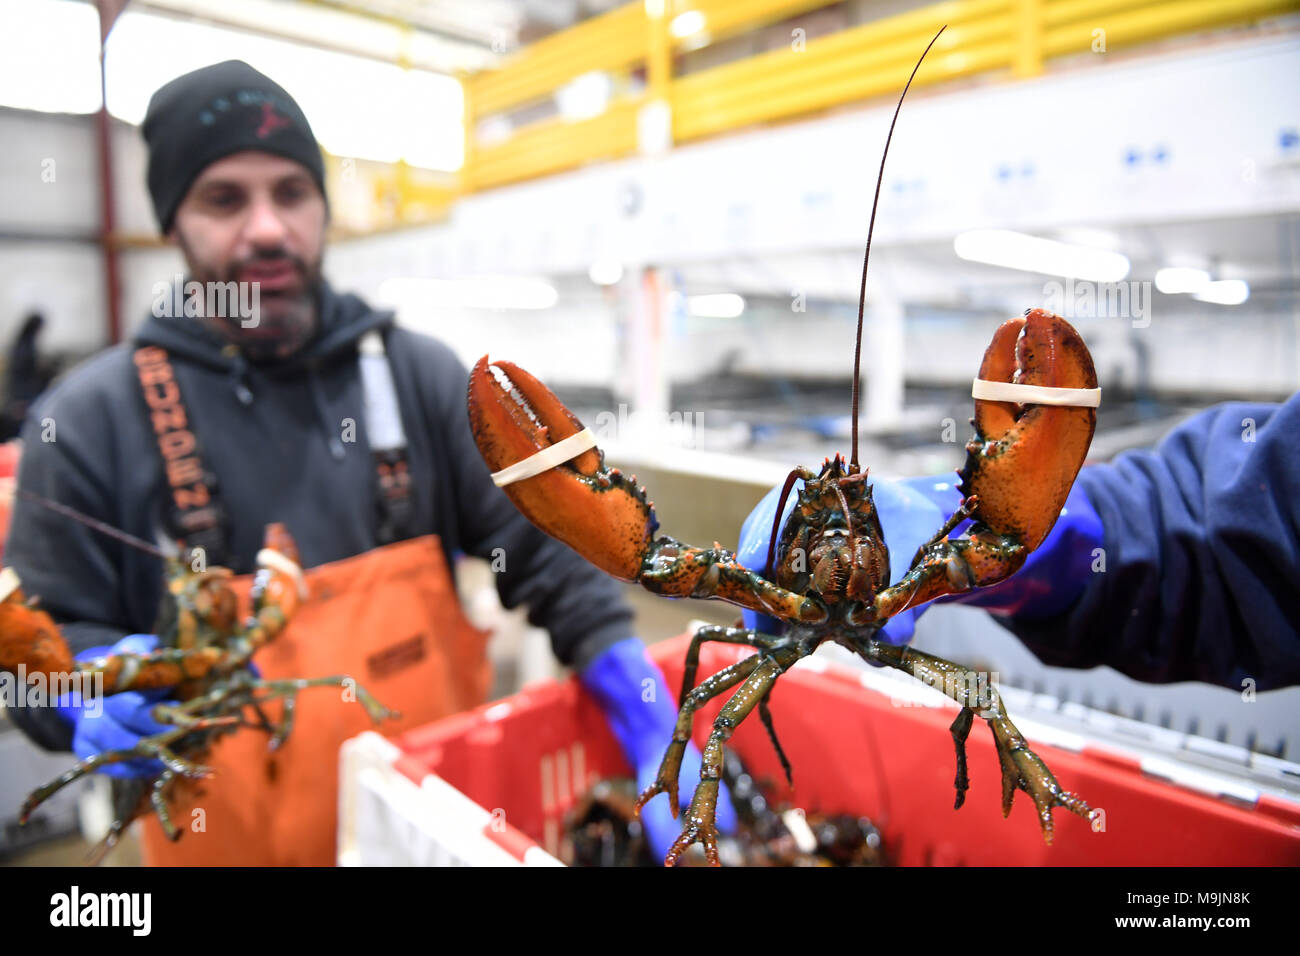 (180327) -- BEIJING, March 27, 2018 (Xinhua) -- Phil Miles (L) and Dave Bedell of Maine Coast company pack lobsters in Portland, Maine, the United States, March 29, 2017. In 2016, China bought 40.9 million dollars' worth of lobsters from Maine, where most of America's lobsters are caught. A 'huge' trade deficit with China is reportedly behind the U.S. administration's plan to slap tariffs on up to 60 billion U.S. dollars of Chinese imports and restrict Chinese investment. But data sometimes lies, and could shield the bigger picture. (Xinhua/Yin Bogu) (djj) Stock Photo